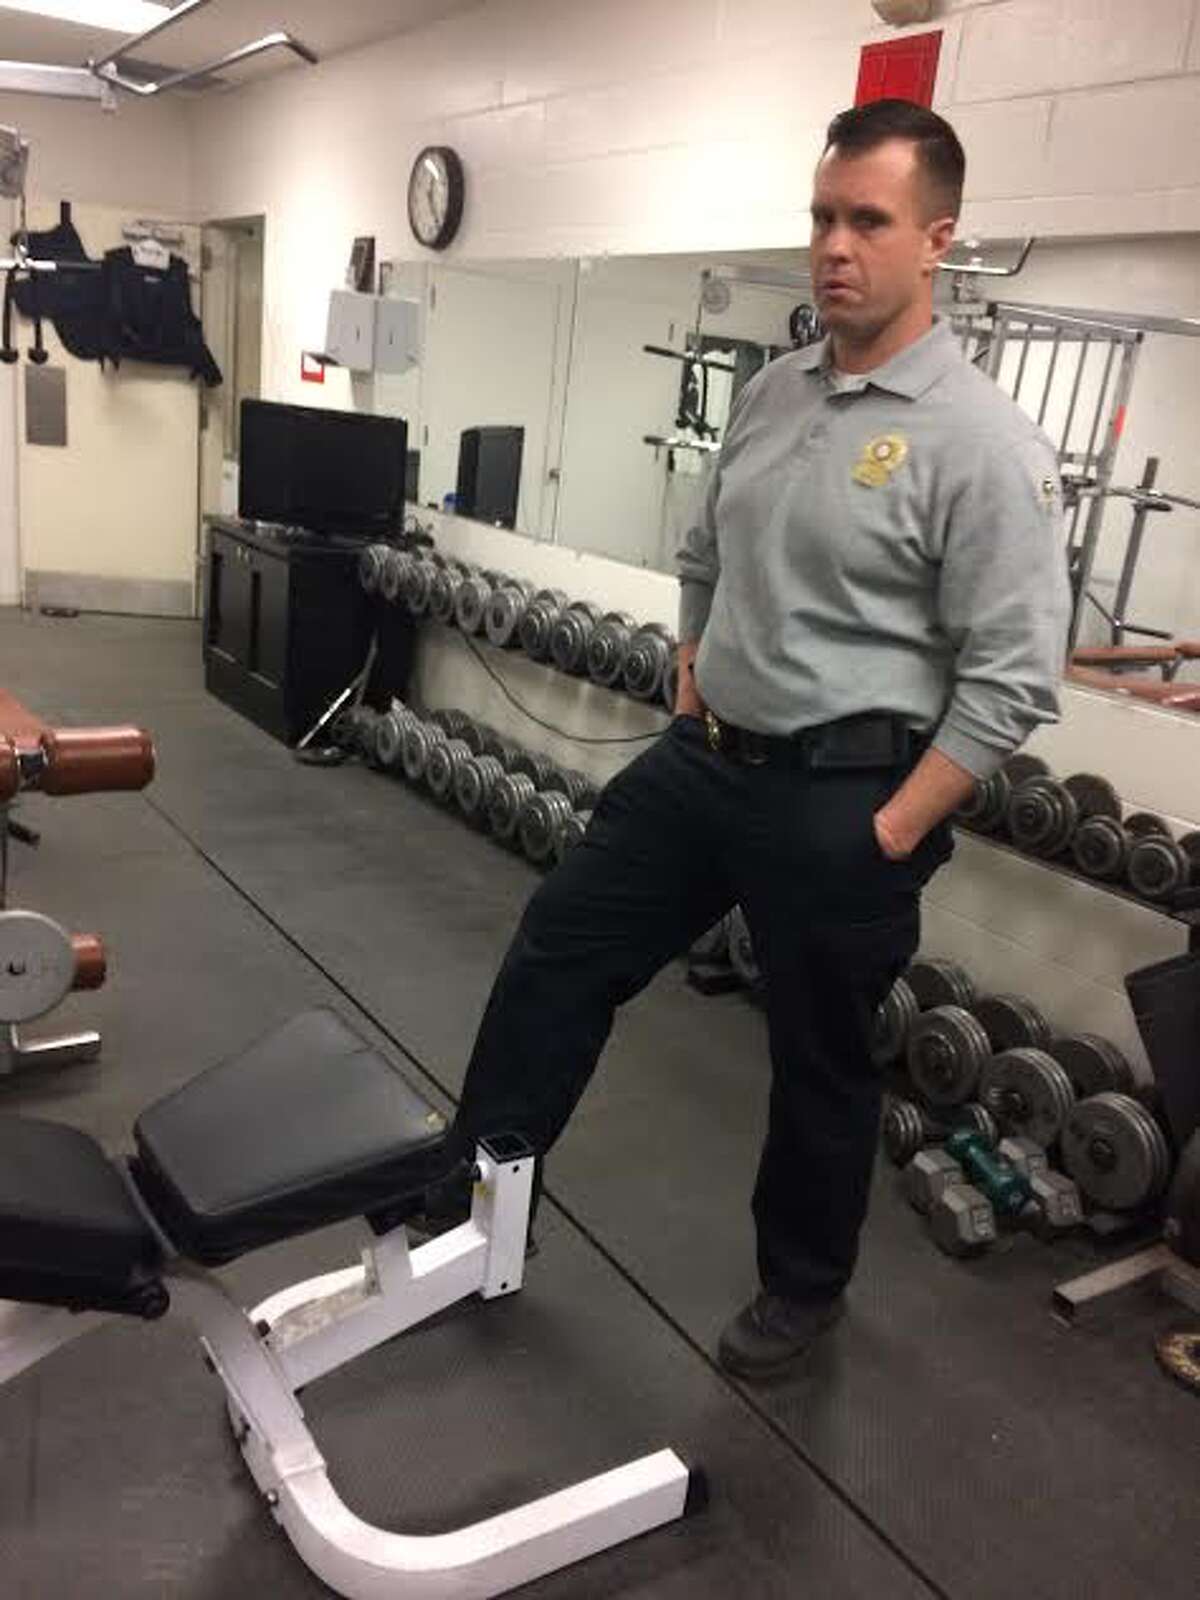 Sgt. Brian Falkenstein and the Trumbull Rotary hope to renovate the Police Department’s 1980s-vintage workout room. — Donald Eng